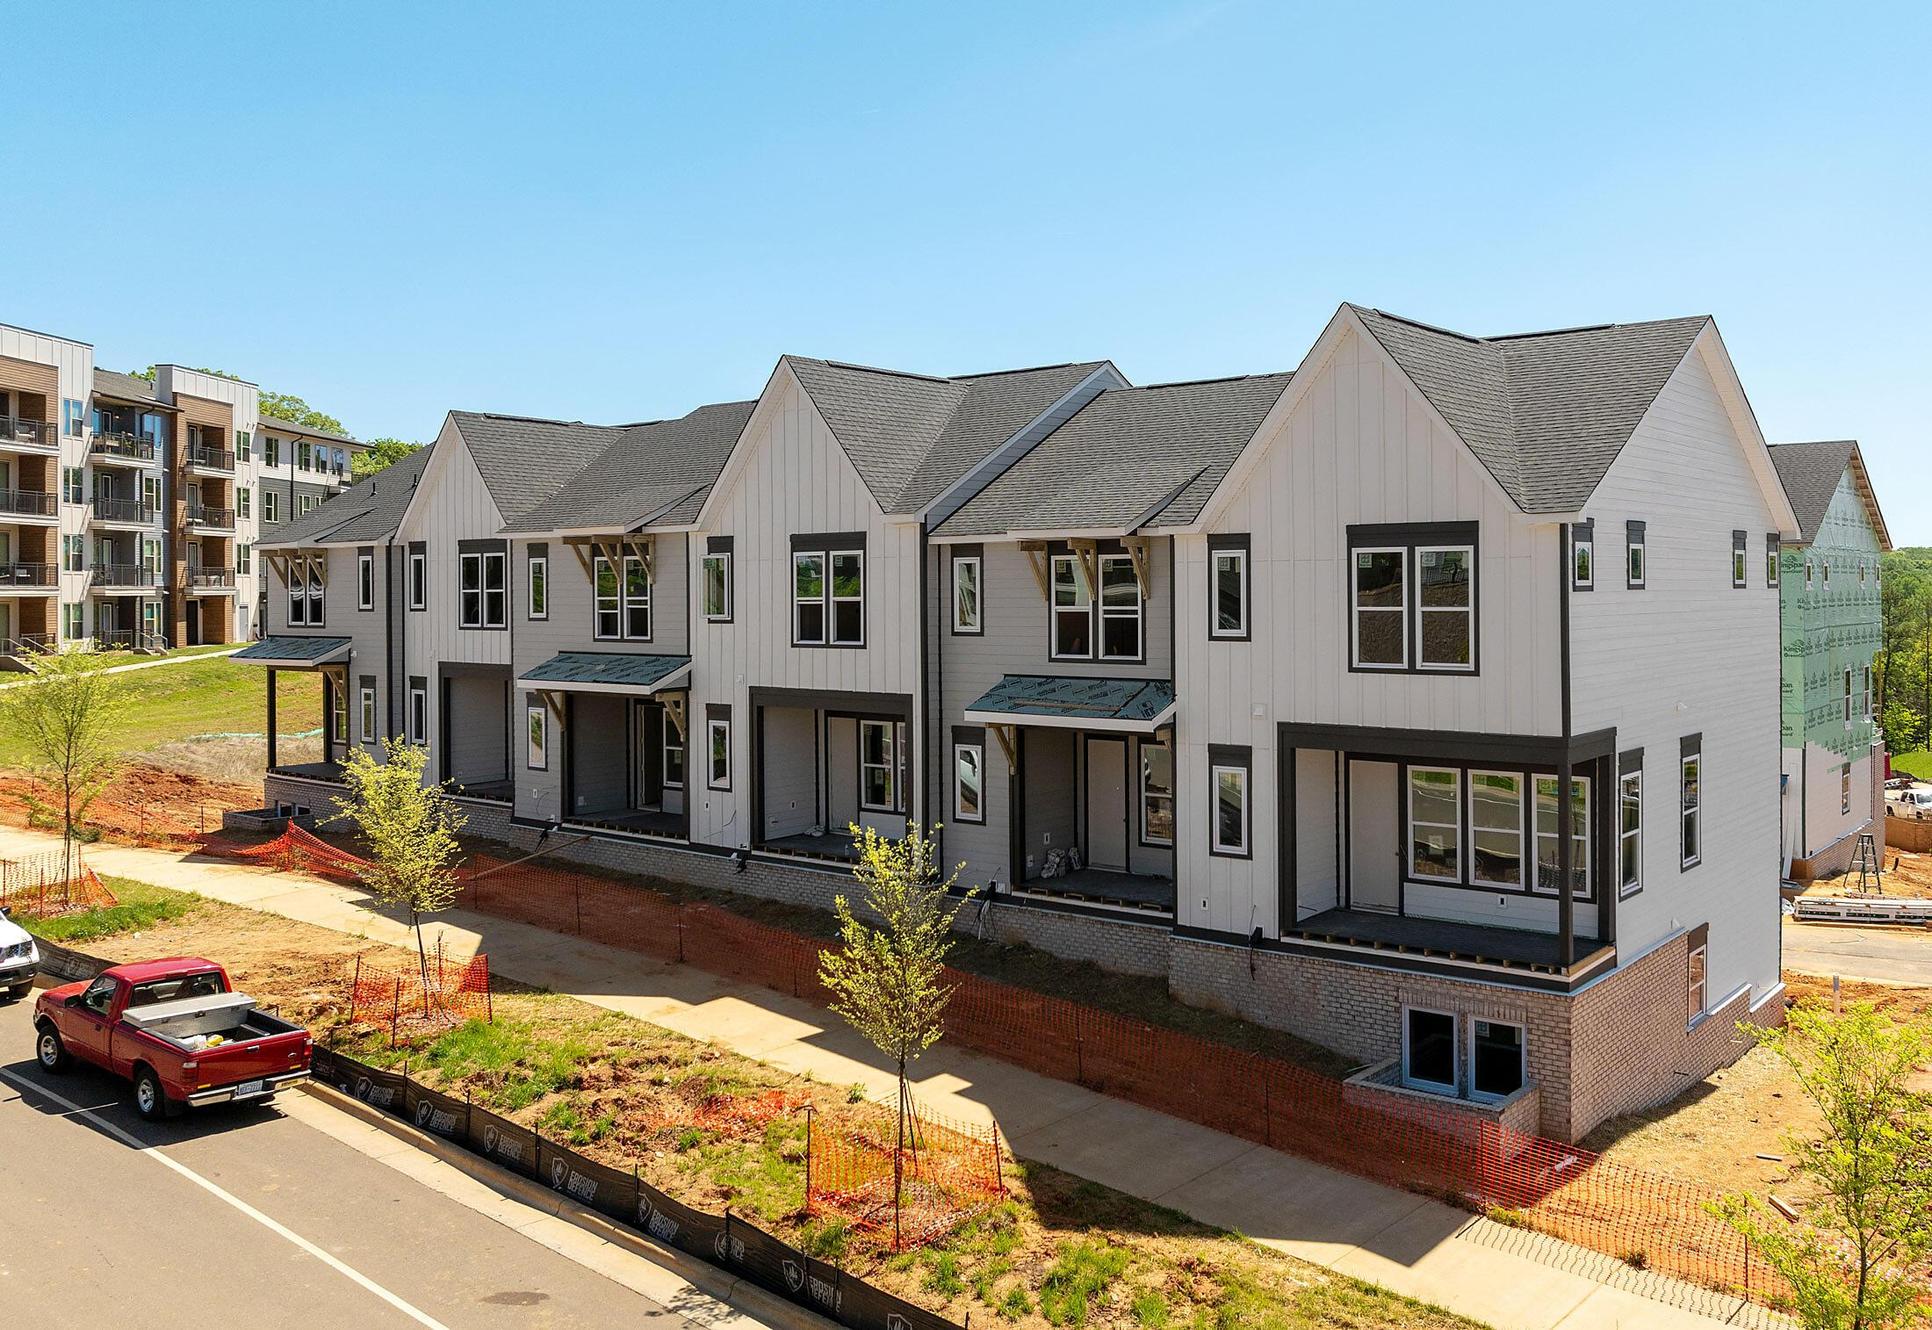 3-story townhomes open in June